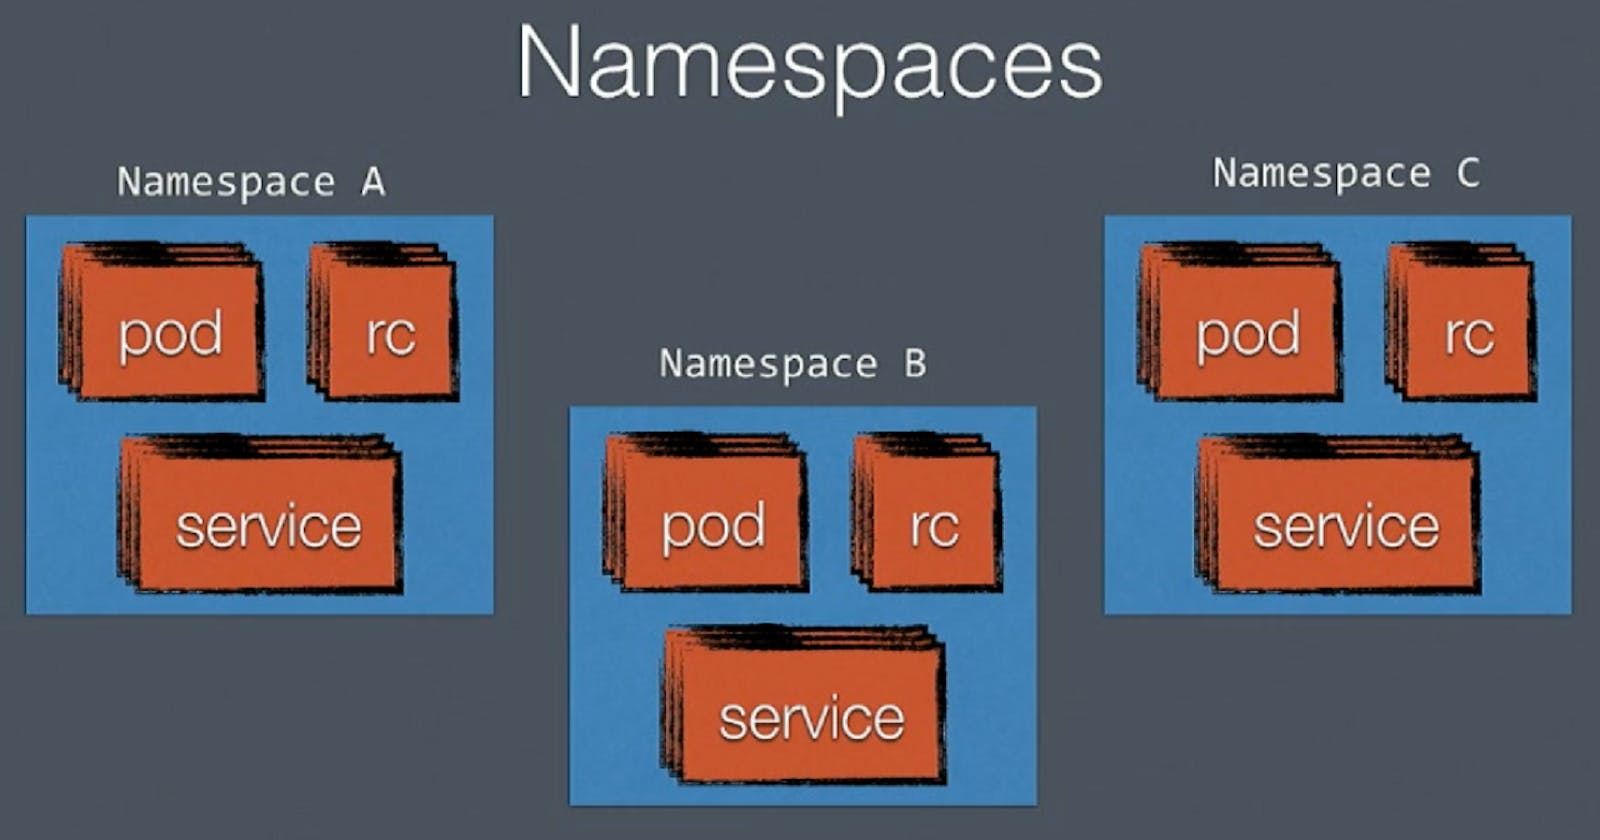 Day 33 Task: Working with Namespaces and Services in Kubernetes